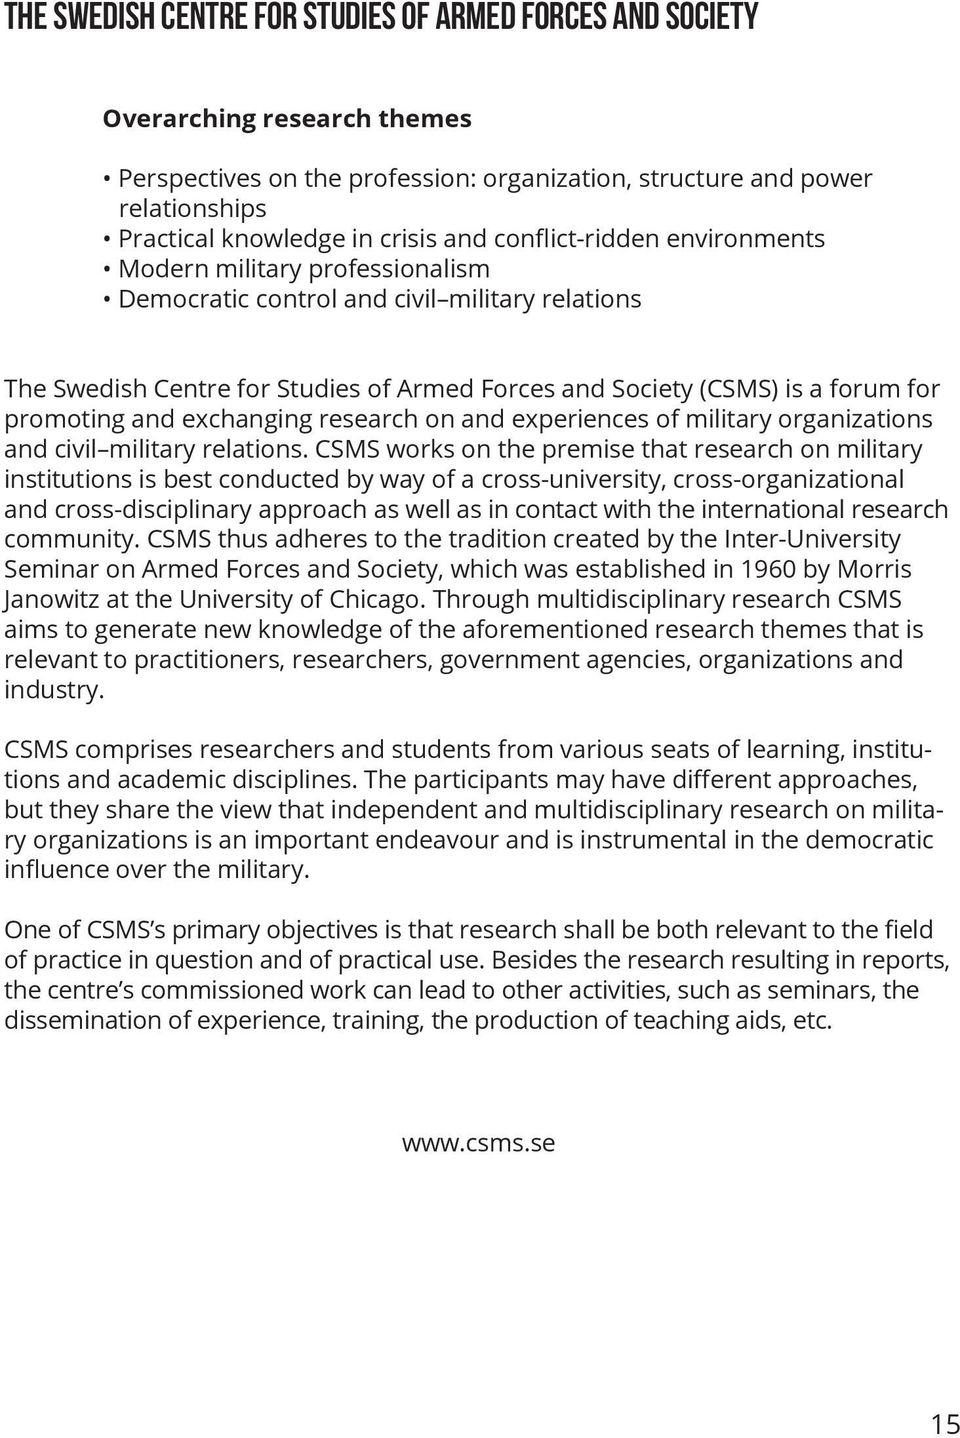 promoting and exchanging research on and experiences of military organizations and civil military relations.